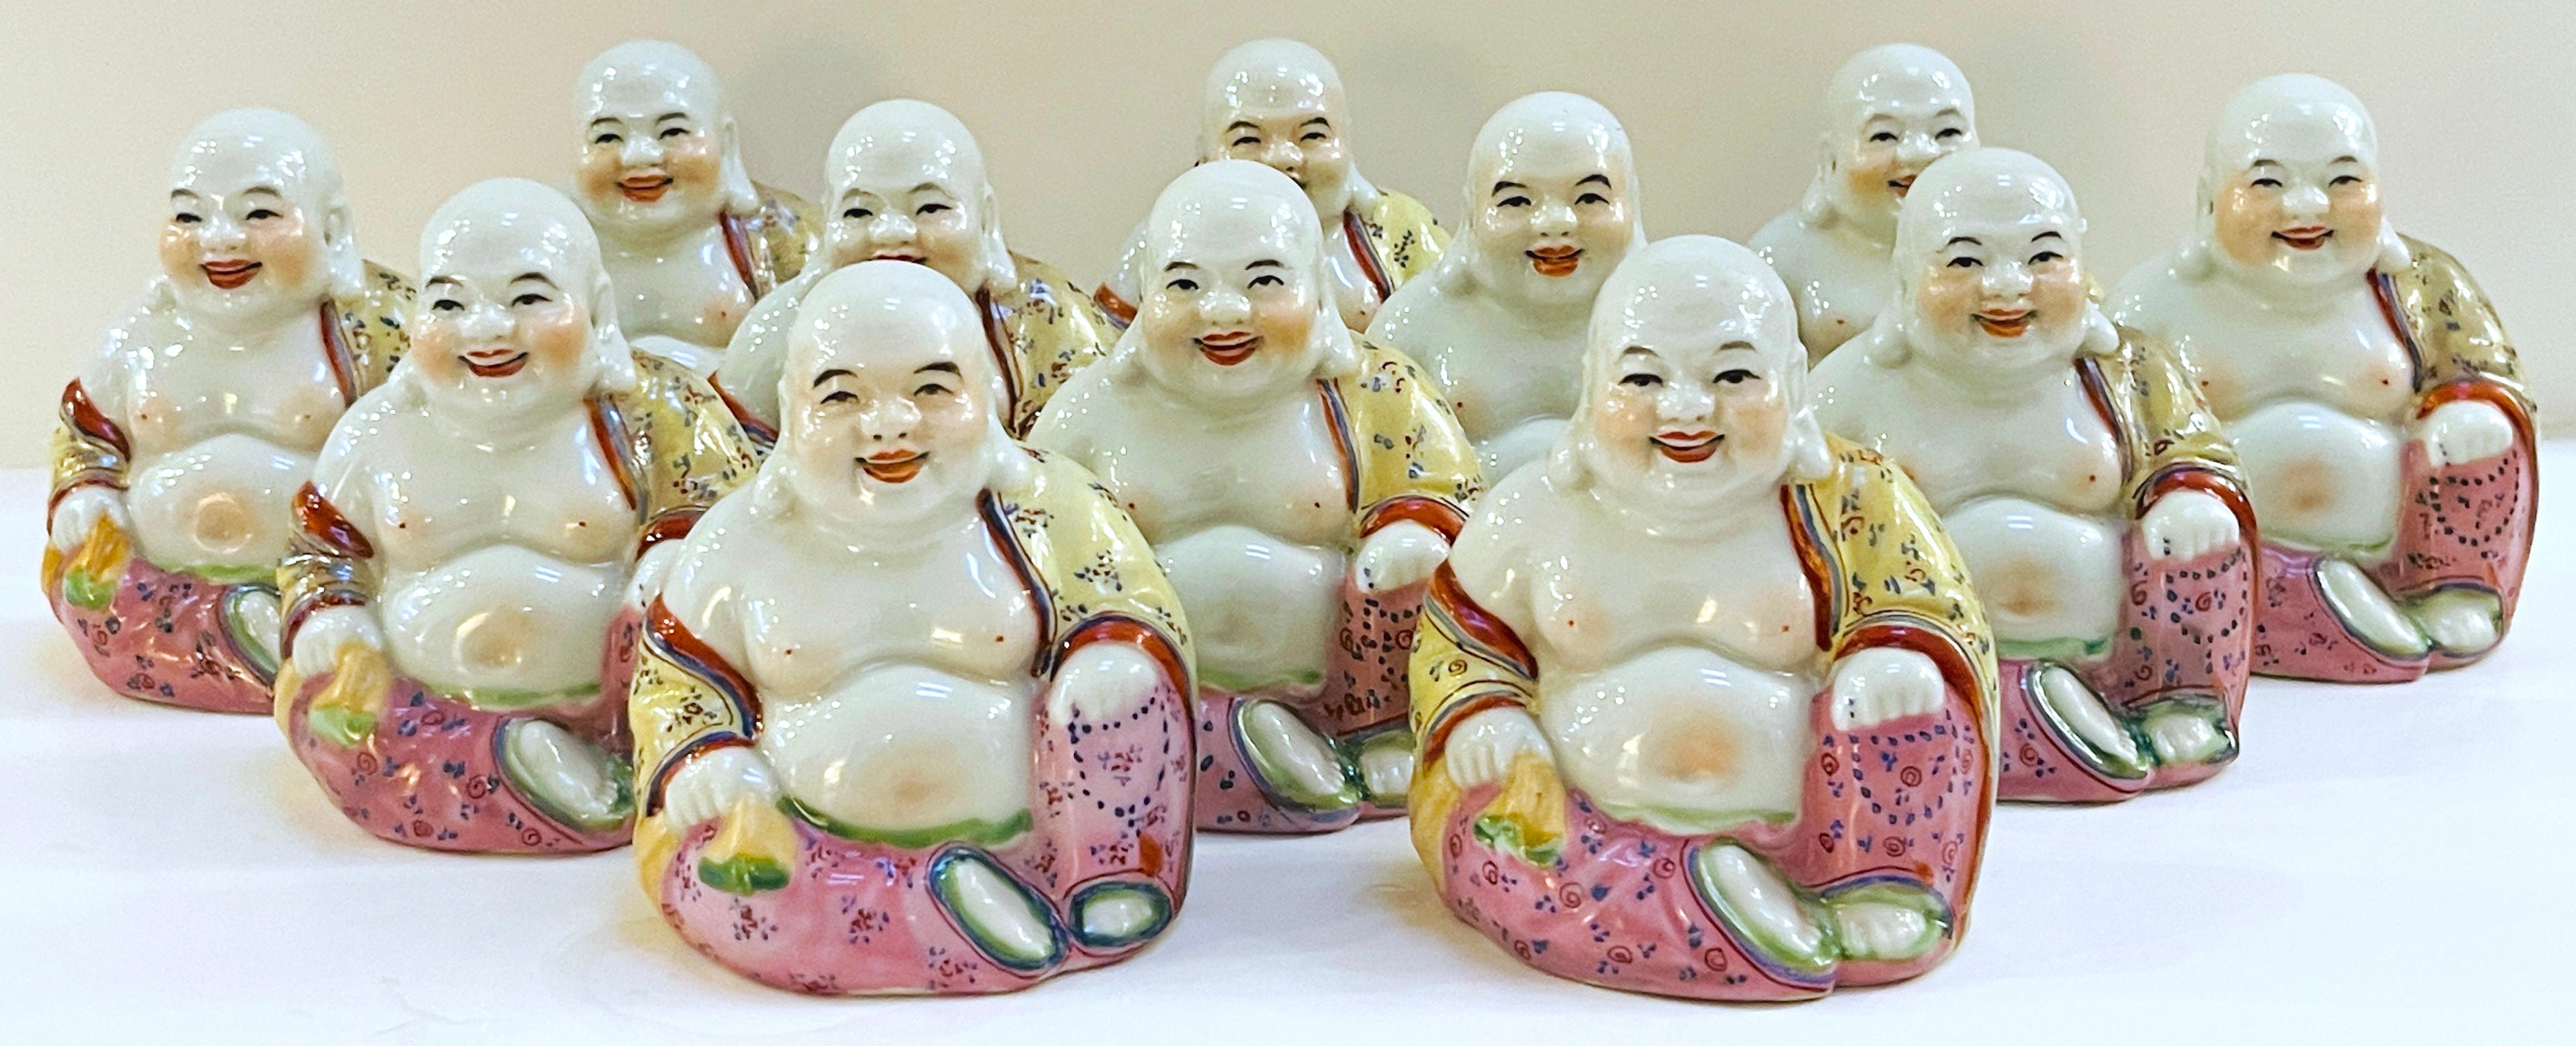 Enameled Collection of 12 Chinese Export Famille-Verte Porcelain Diminutive Buddhas For Sale